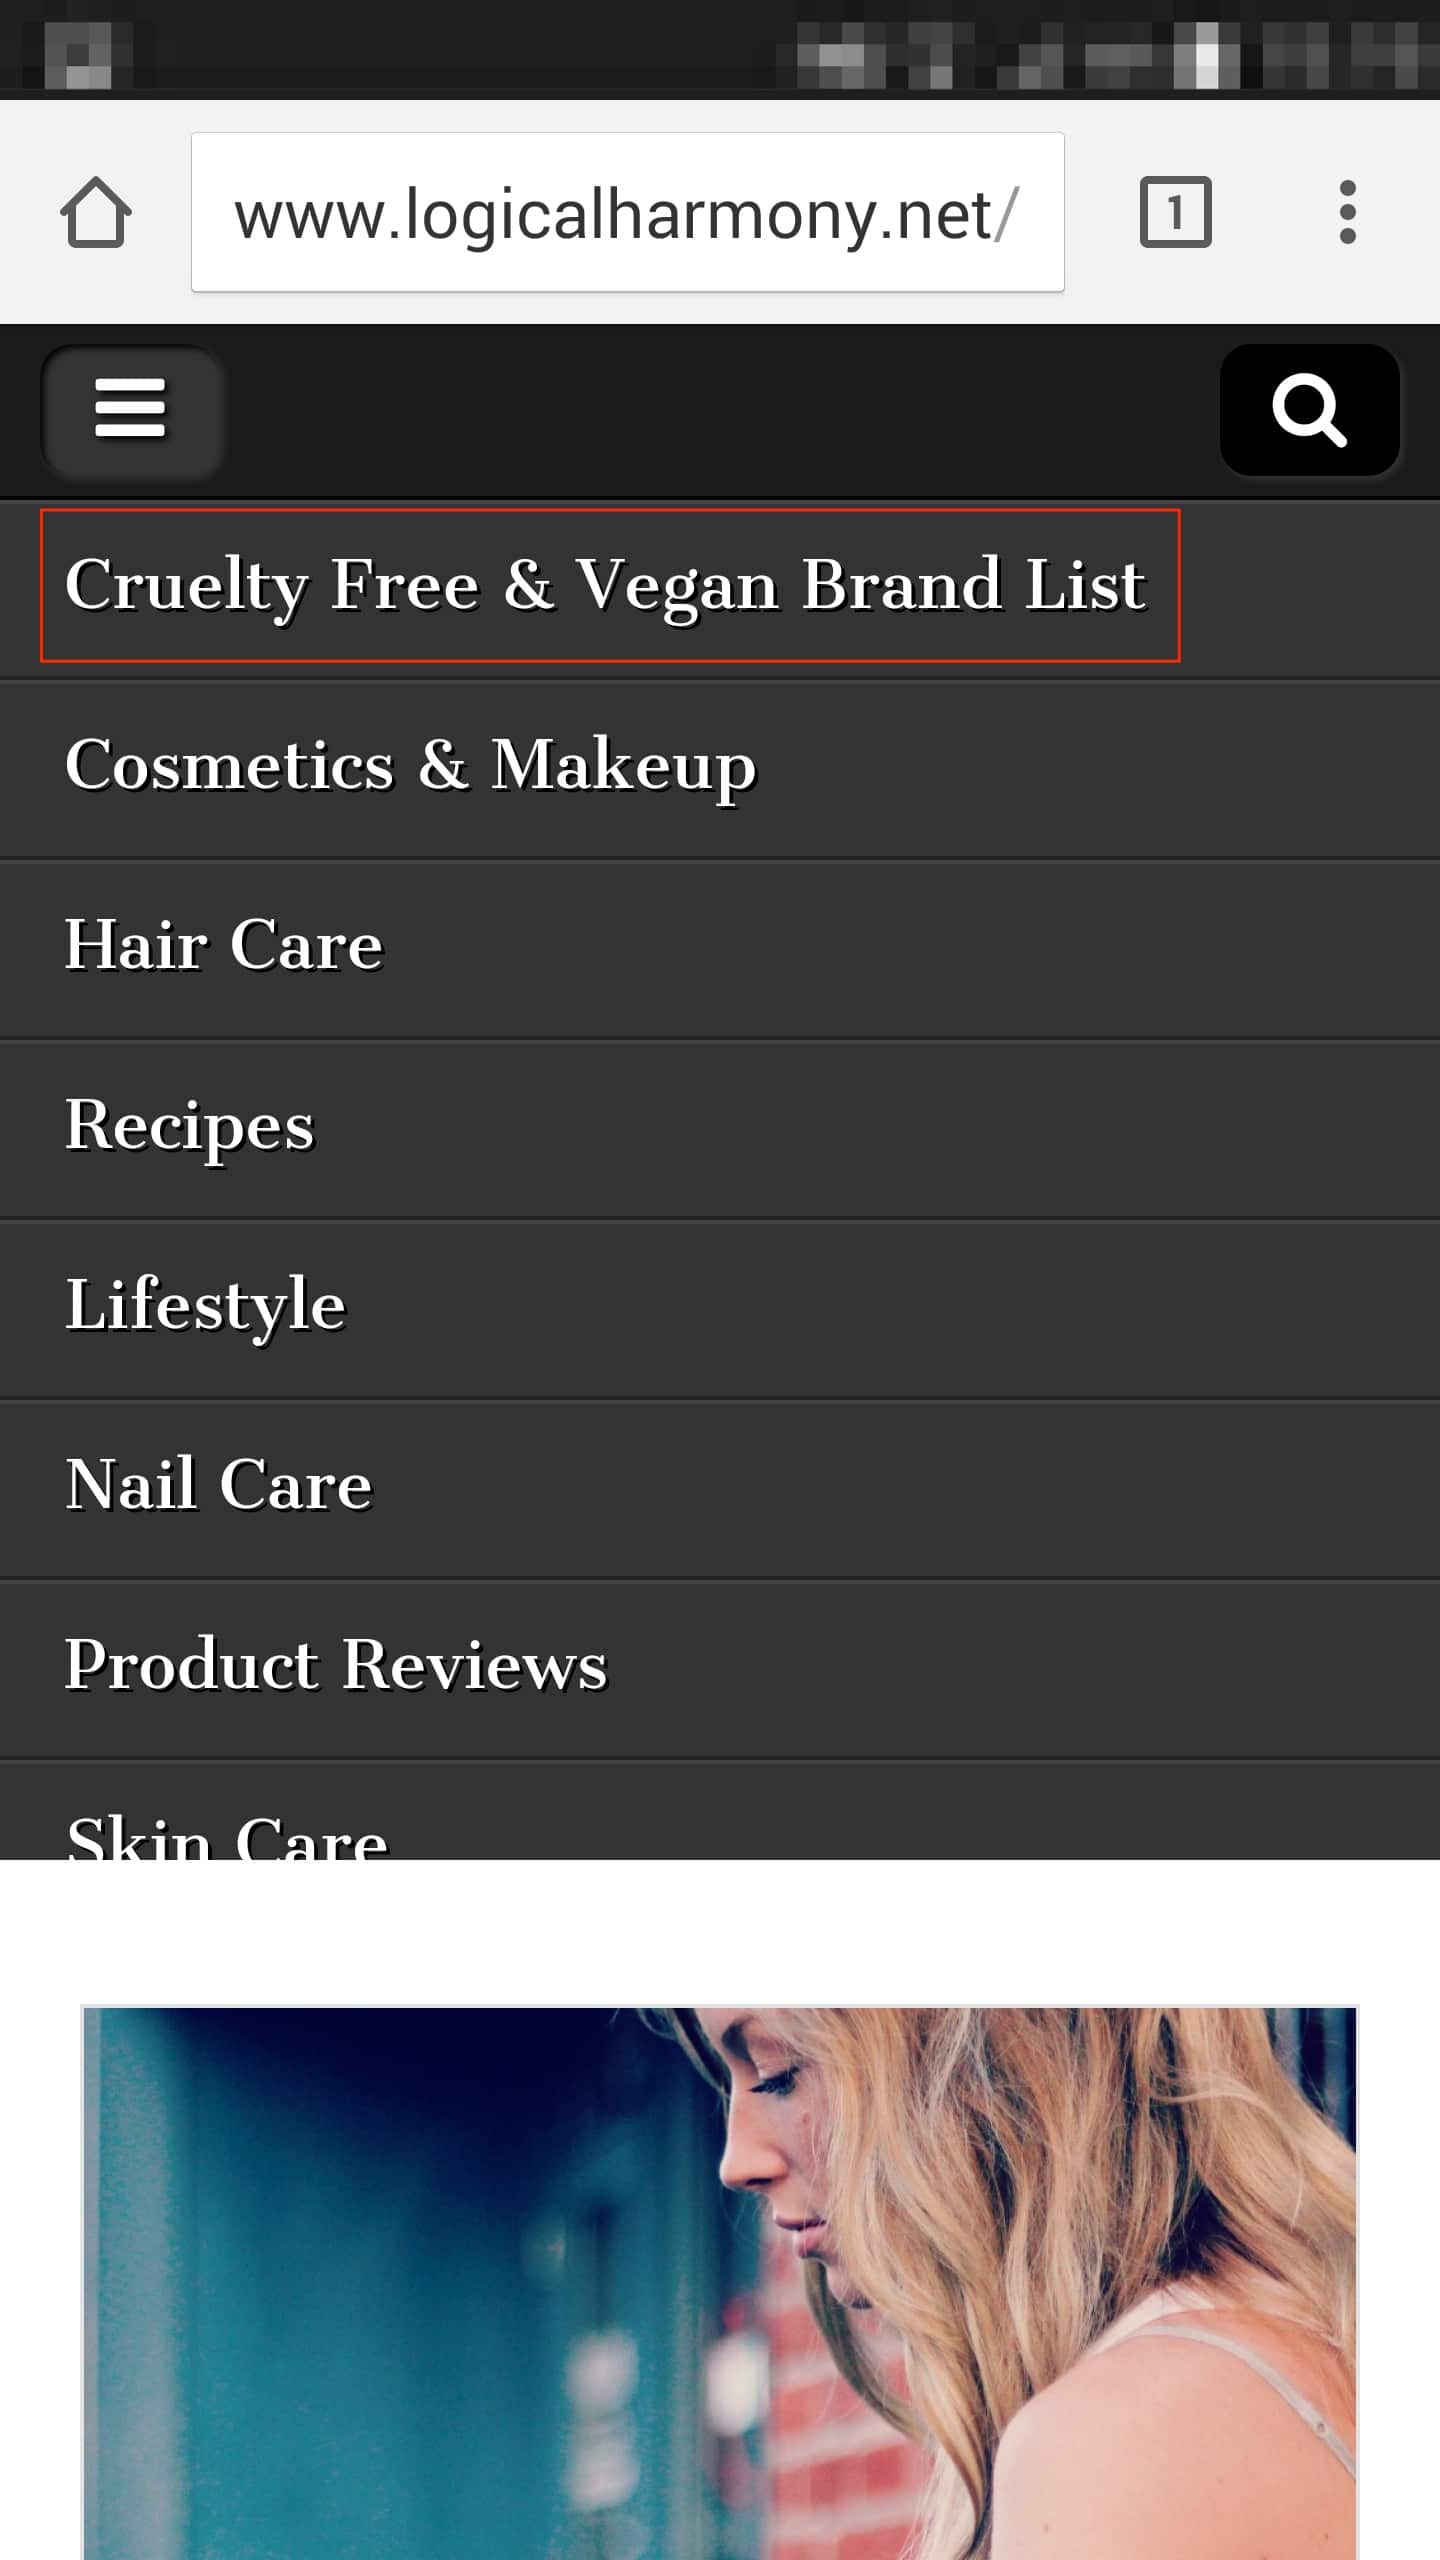 How to Add the Logical Harmony Cruelty Free Brand List to your Droid